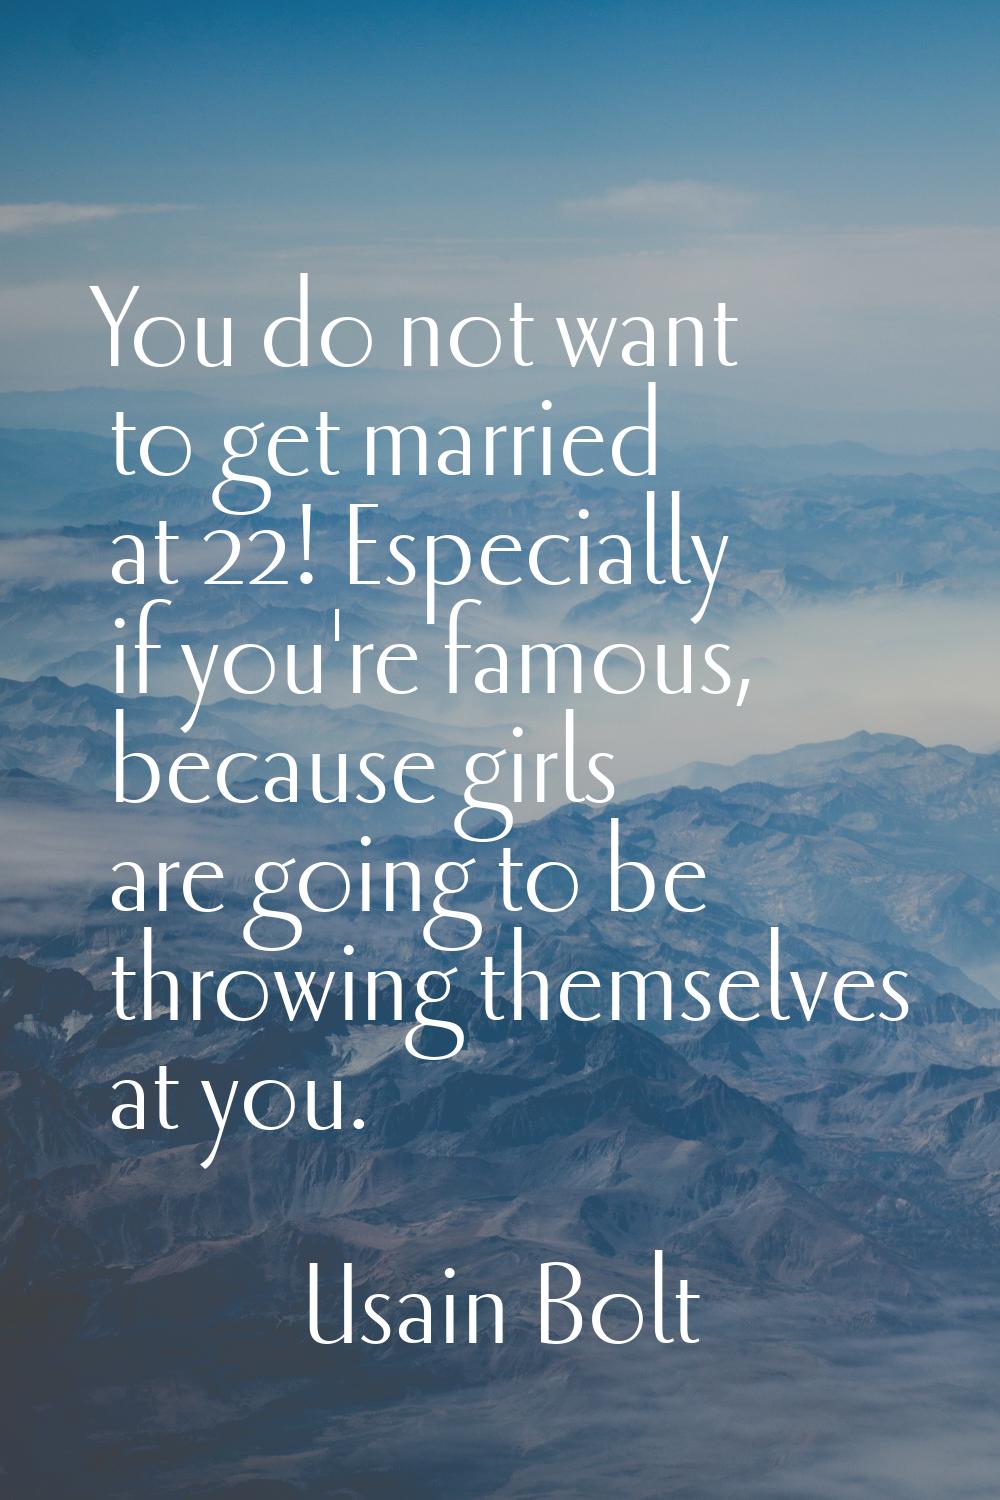 You do not want to get married at 22! Especially if you're famous, because girls are going to be th